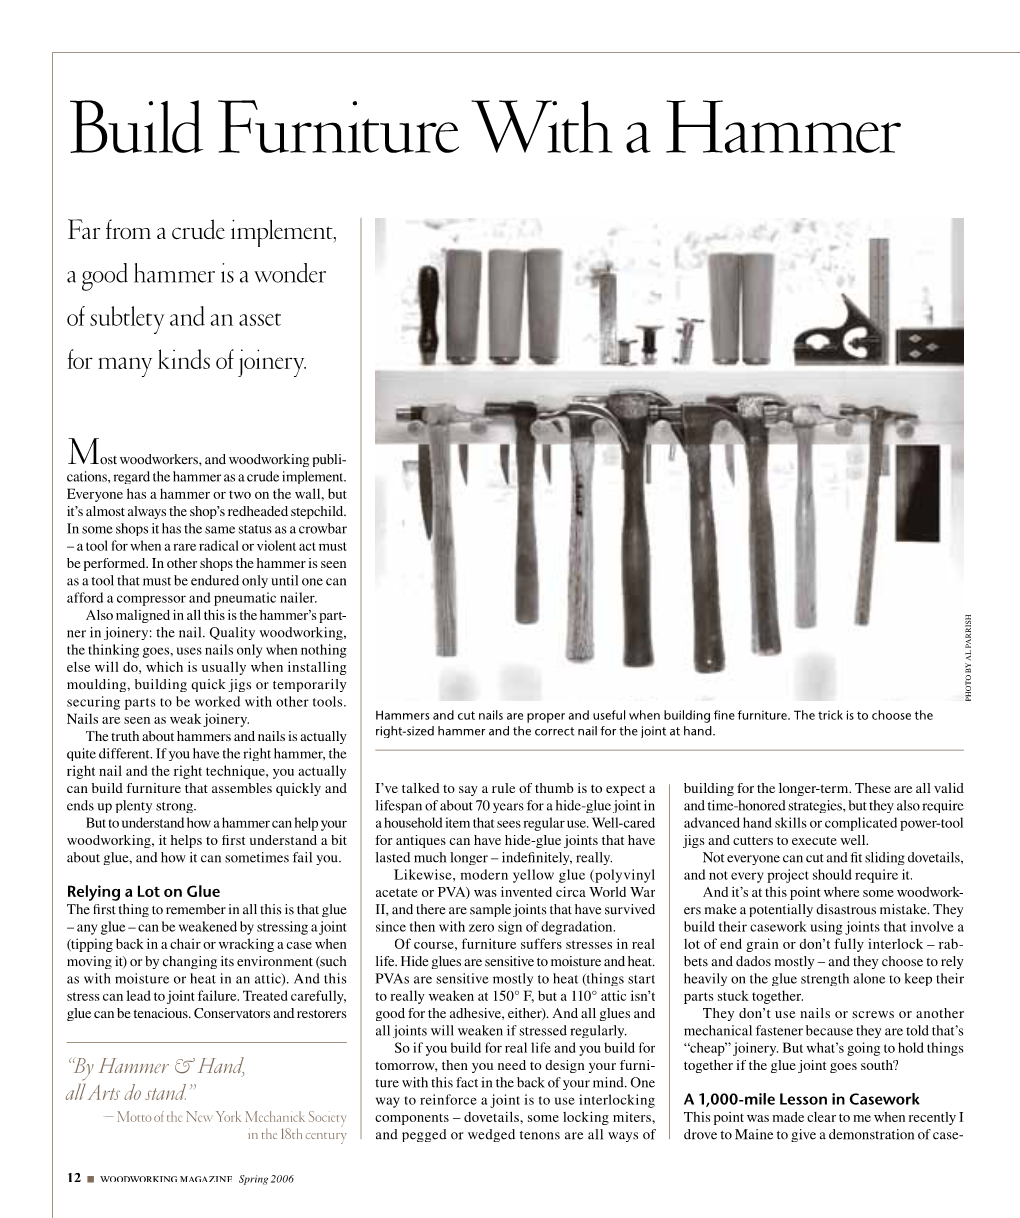 Build Furniture with a Hammer